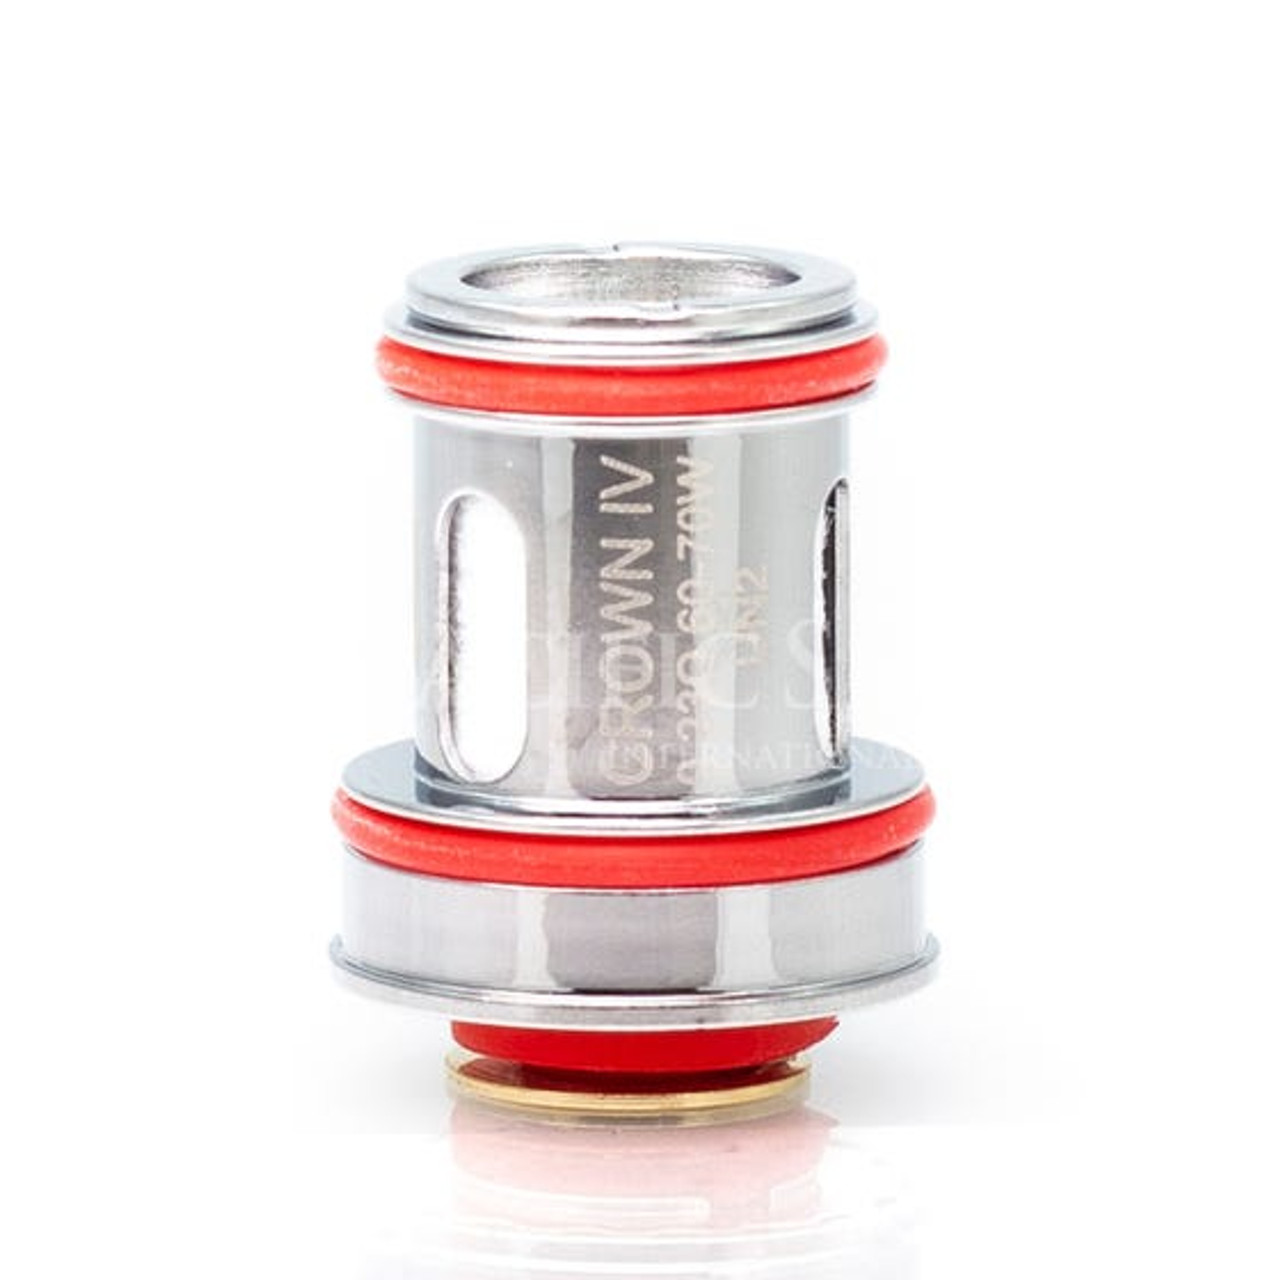 Uwell - "Crown 4 UN2 Mesh Coils 0.23 ohms Replacement Coils" (4-Pack) -  Vapes by Enushi